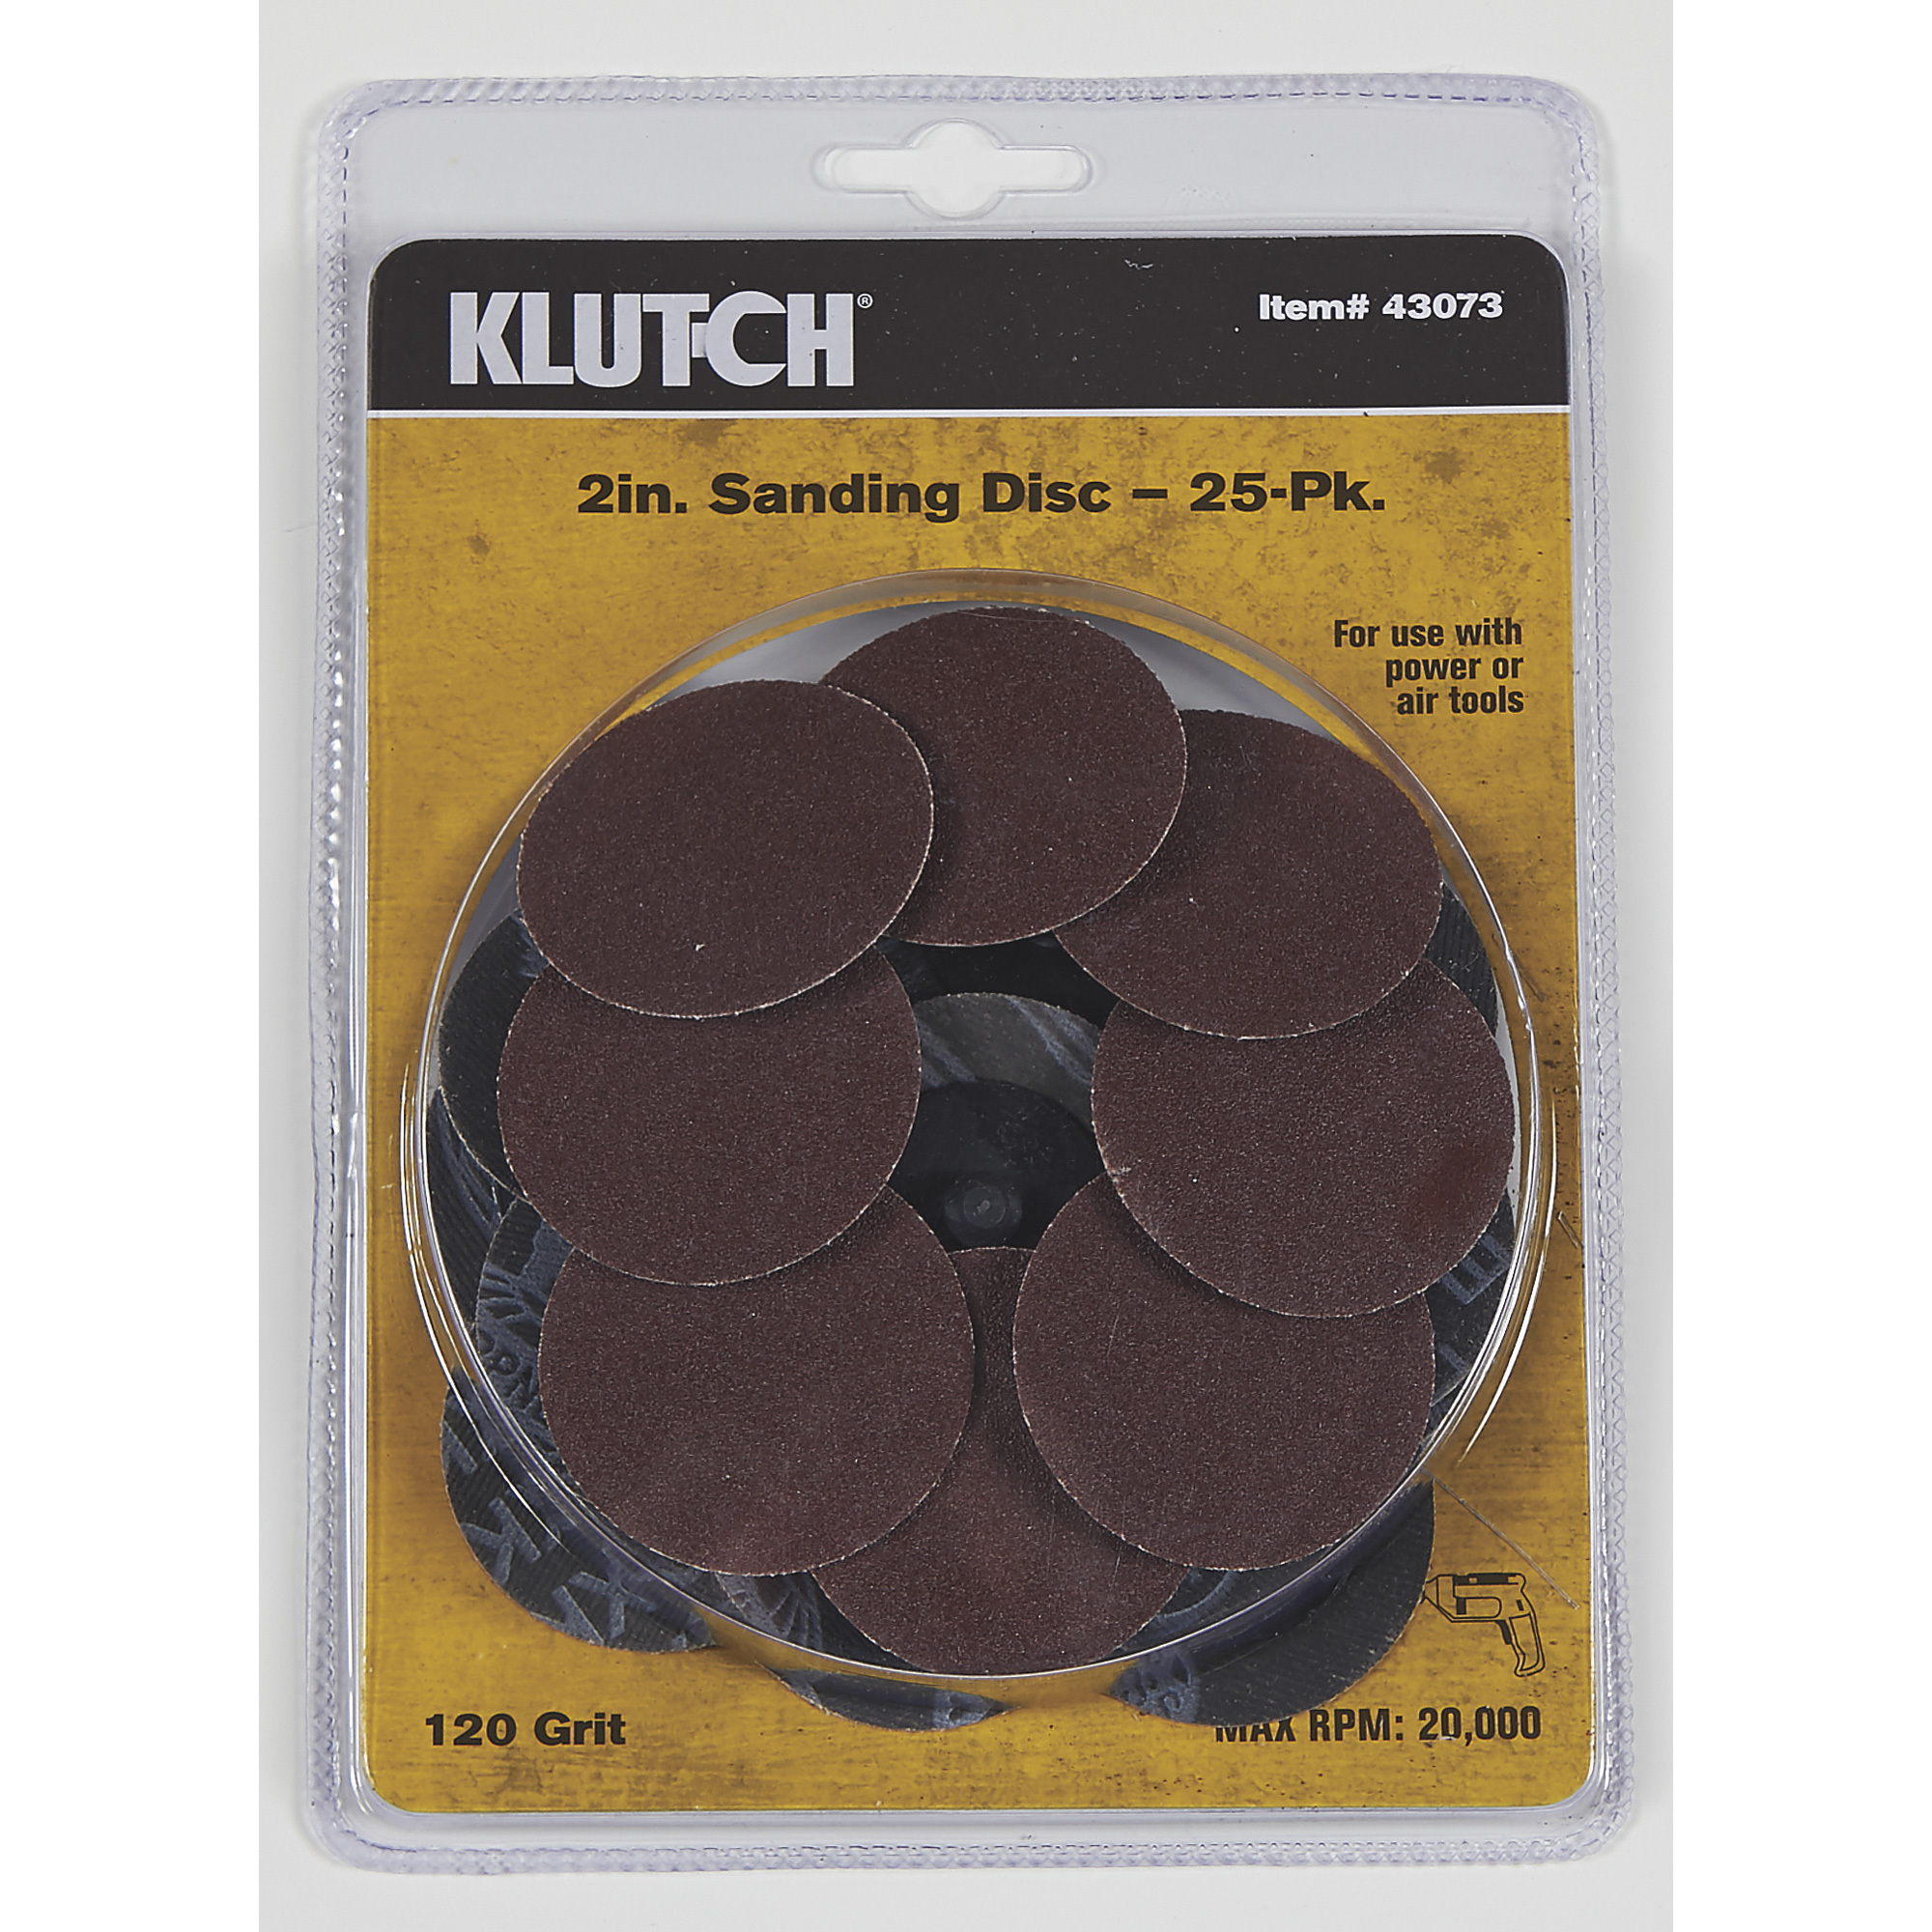 Klutch 2Inch 120 Grit Sand Paper Disks with Rolok Quick Connect-- 25-Pack, for Use with Power Drill, 1/4Inch Round Shaft